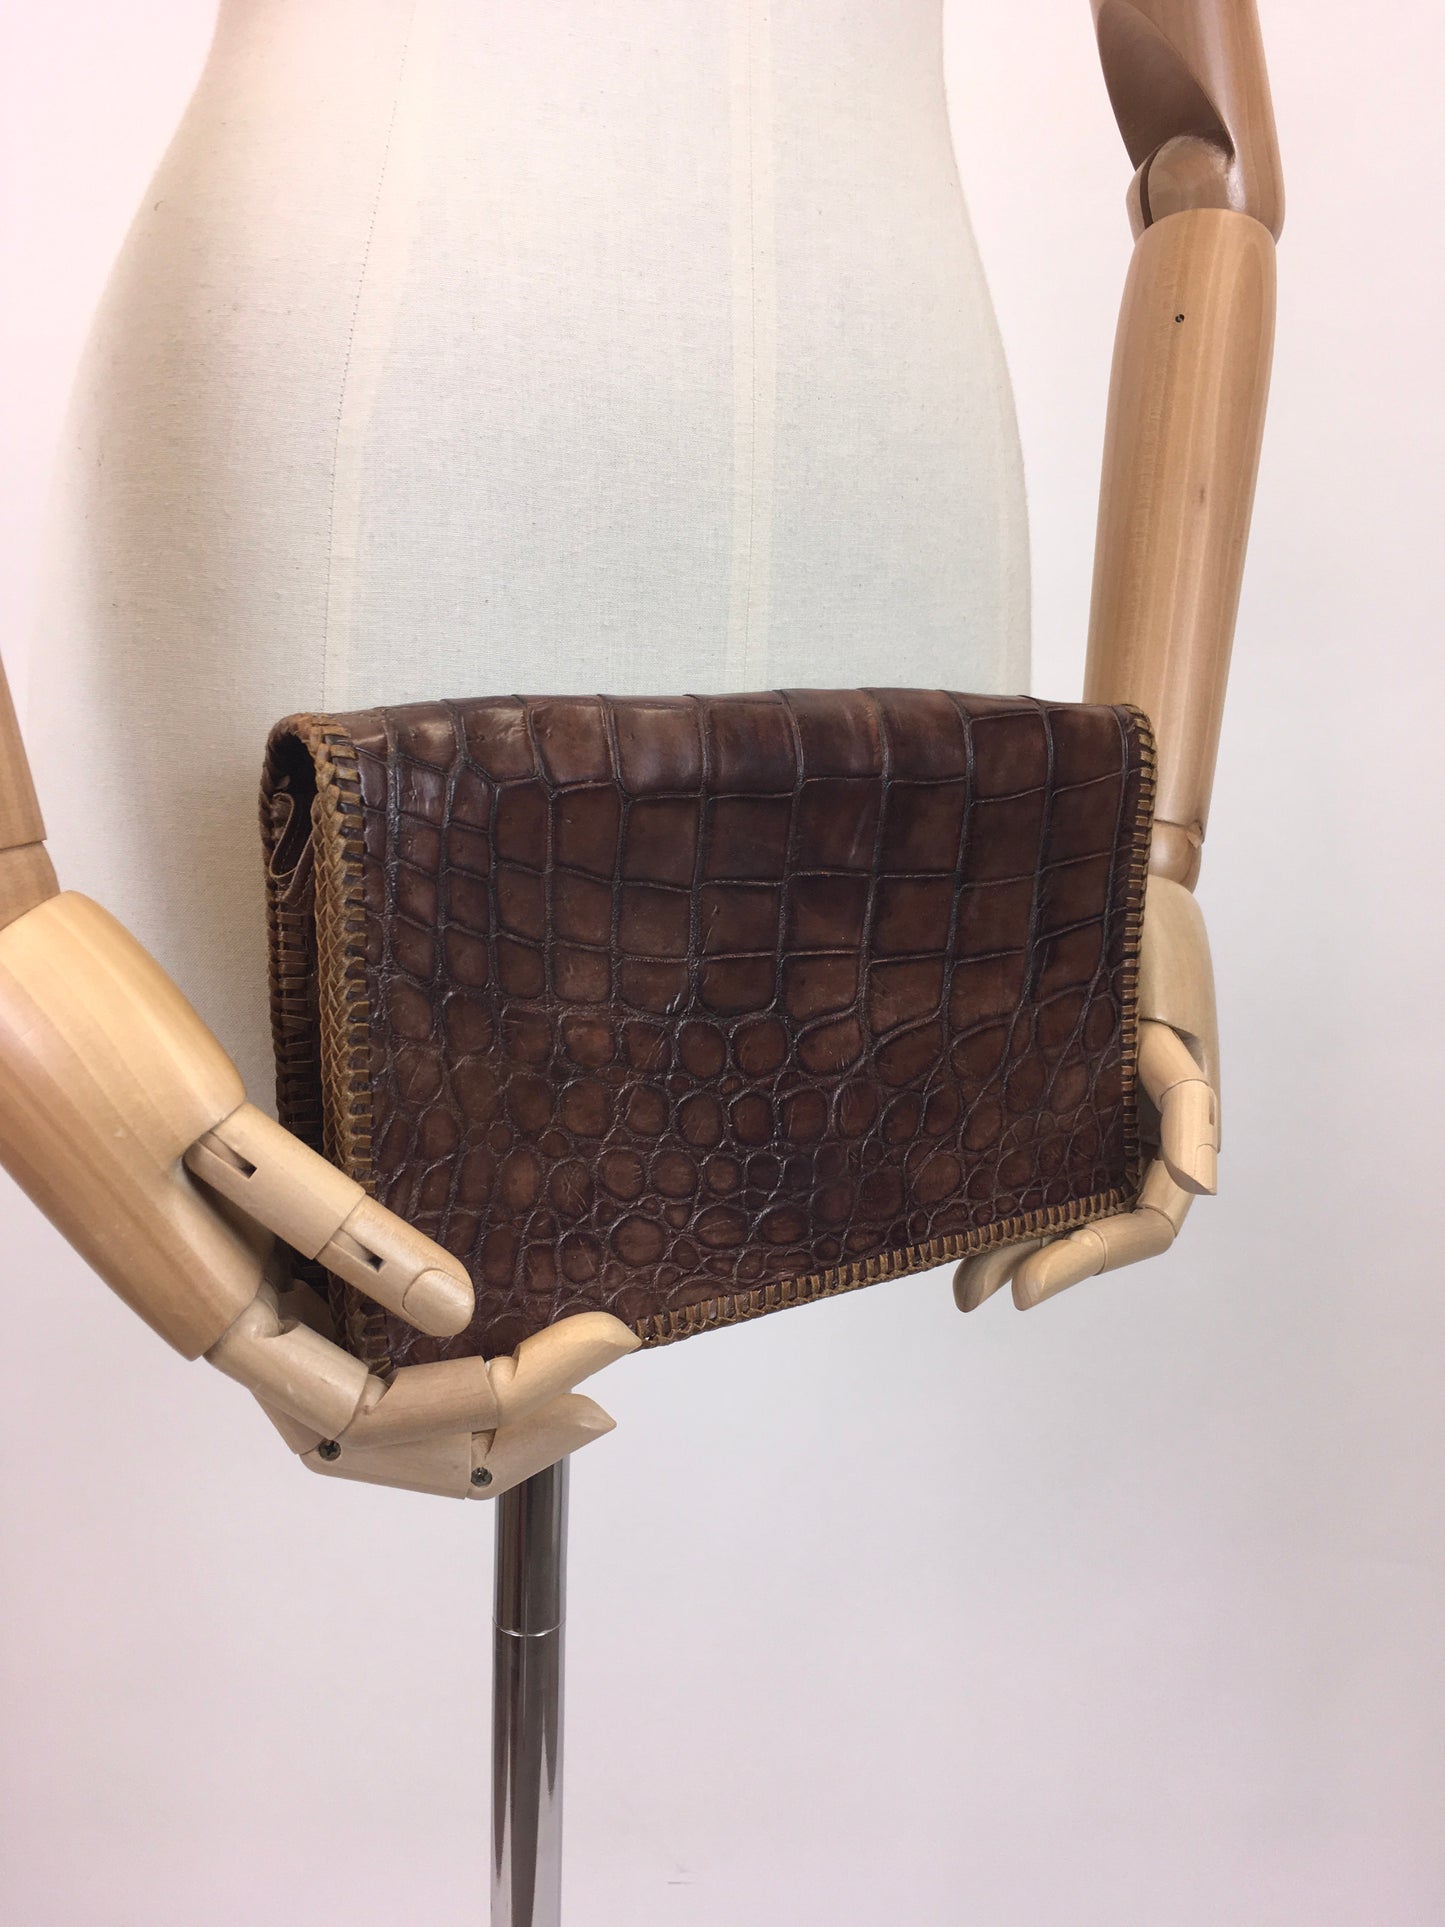 Original 1930's Classic Leather Clutch Handbag - With Handy Internal Compartments